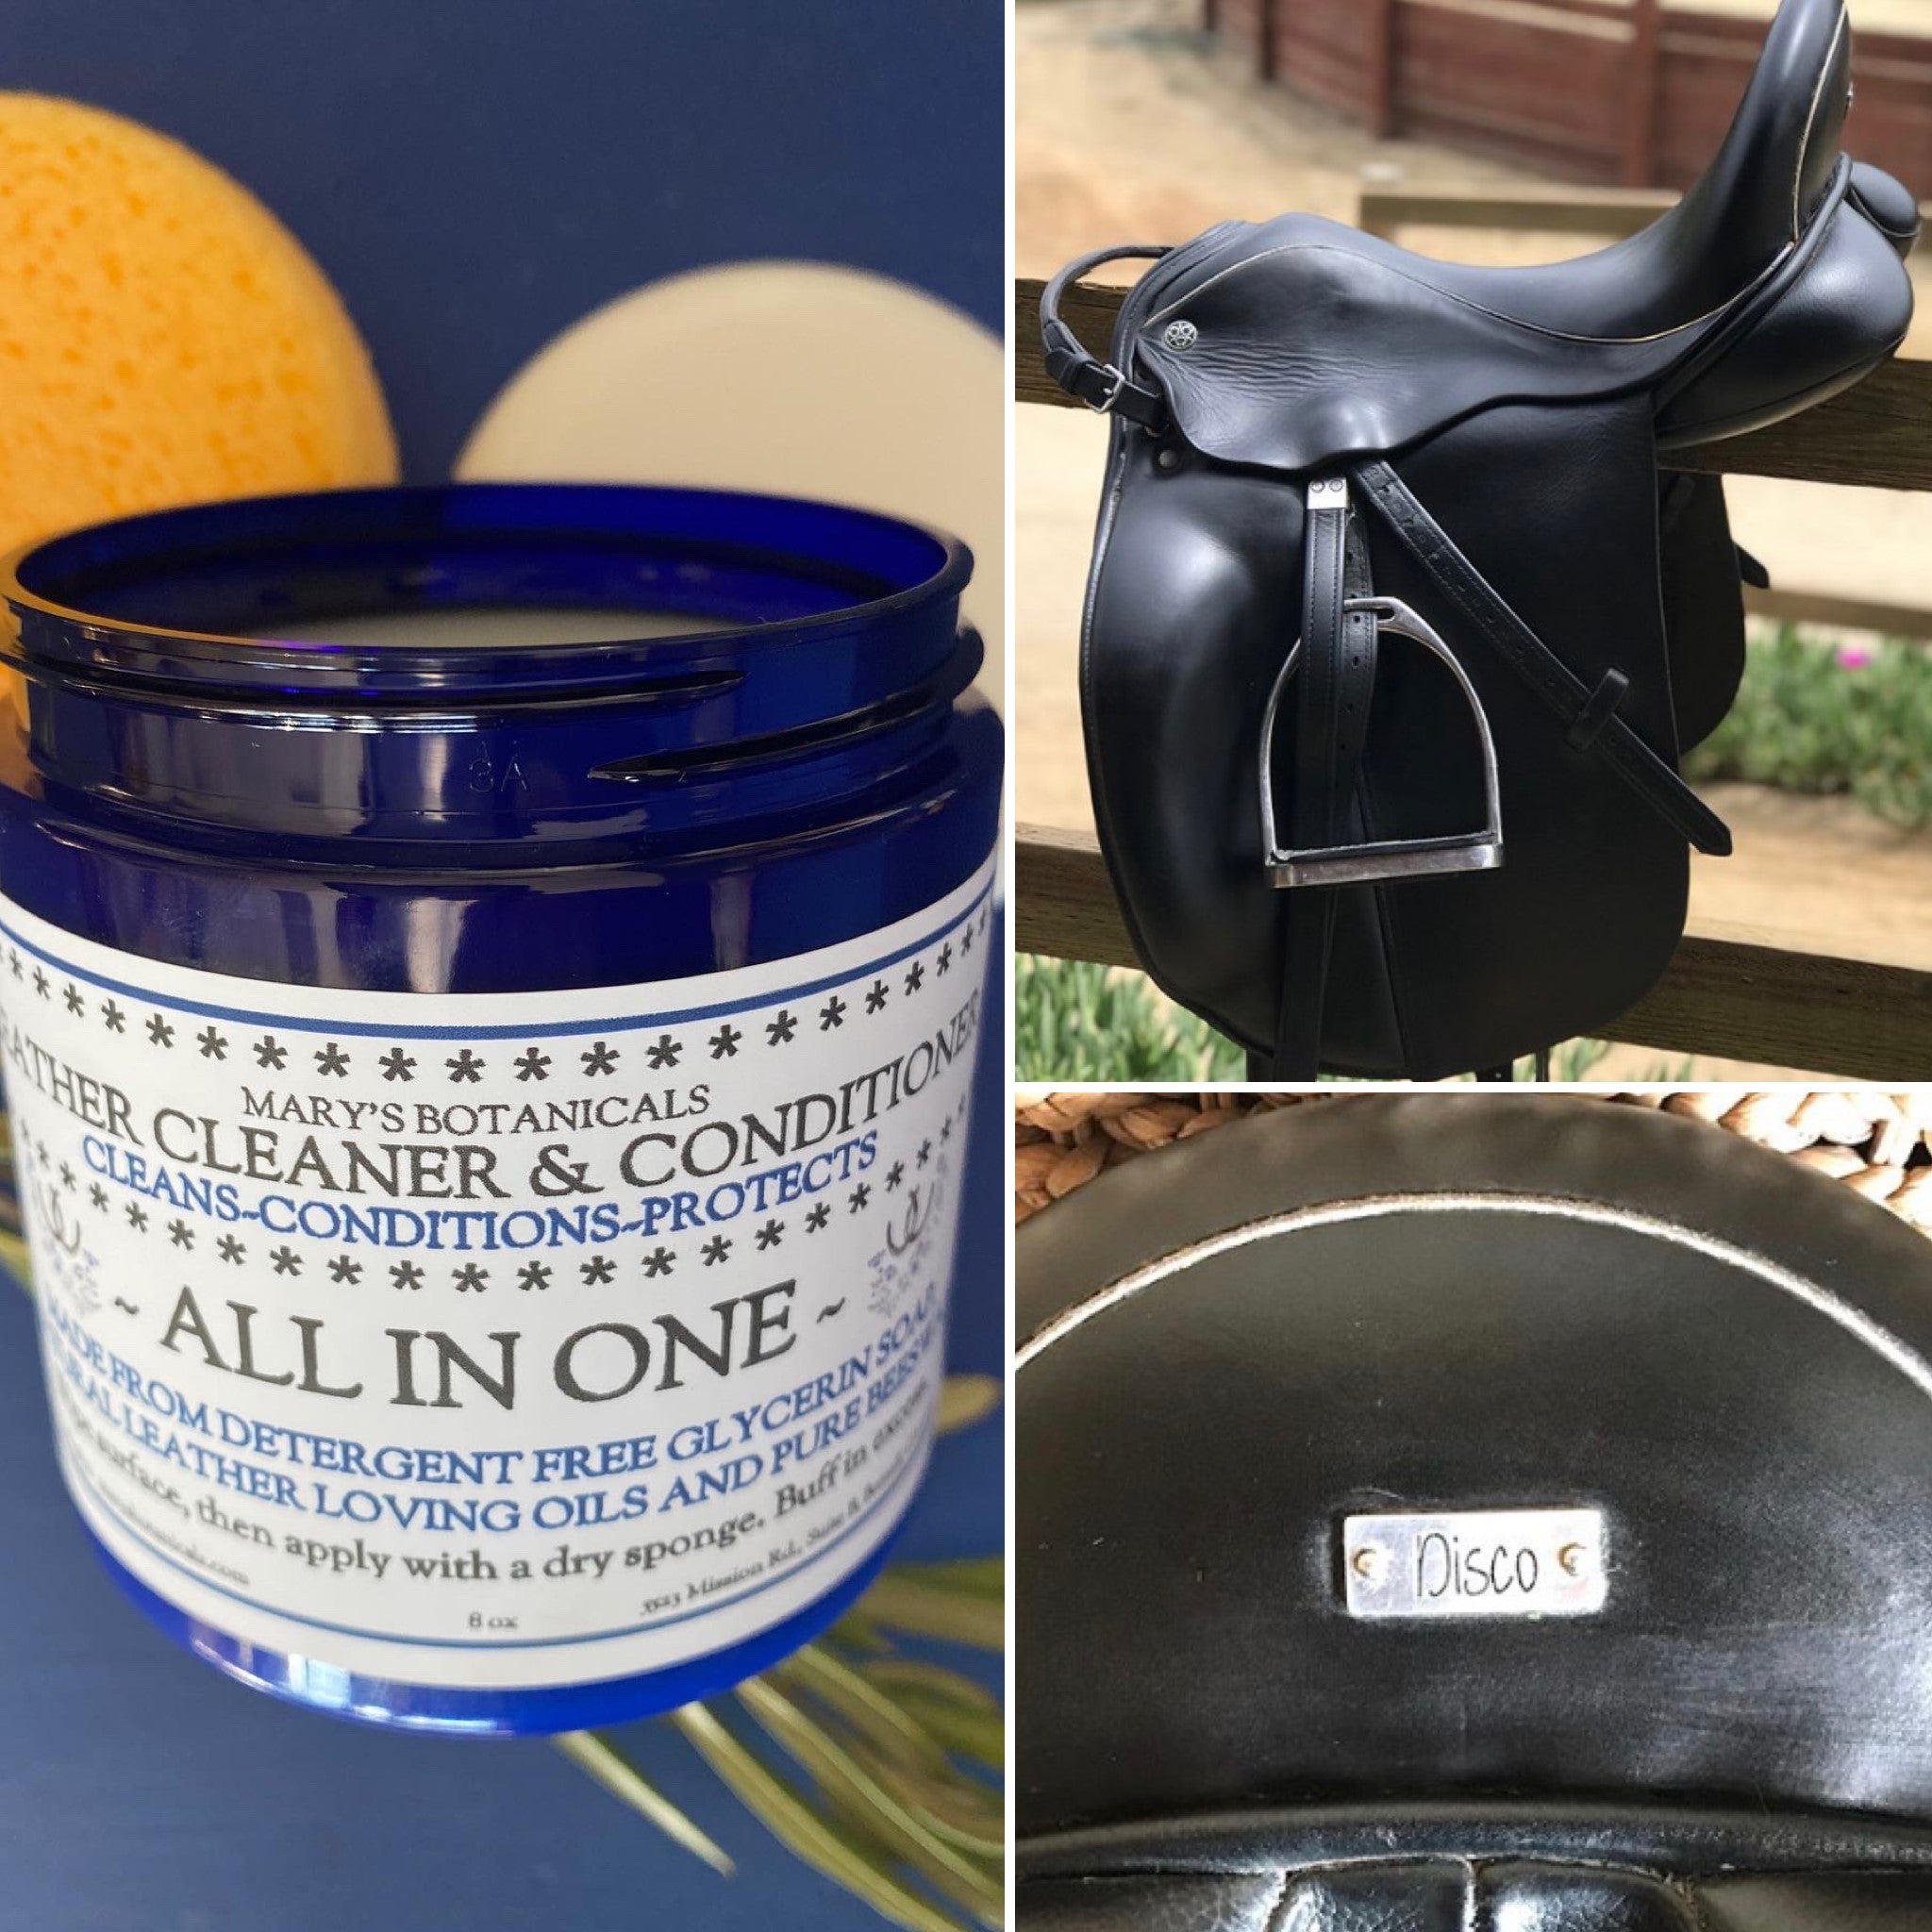 All-In-One  Leather Cleaner & Conditioner